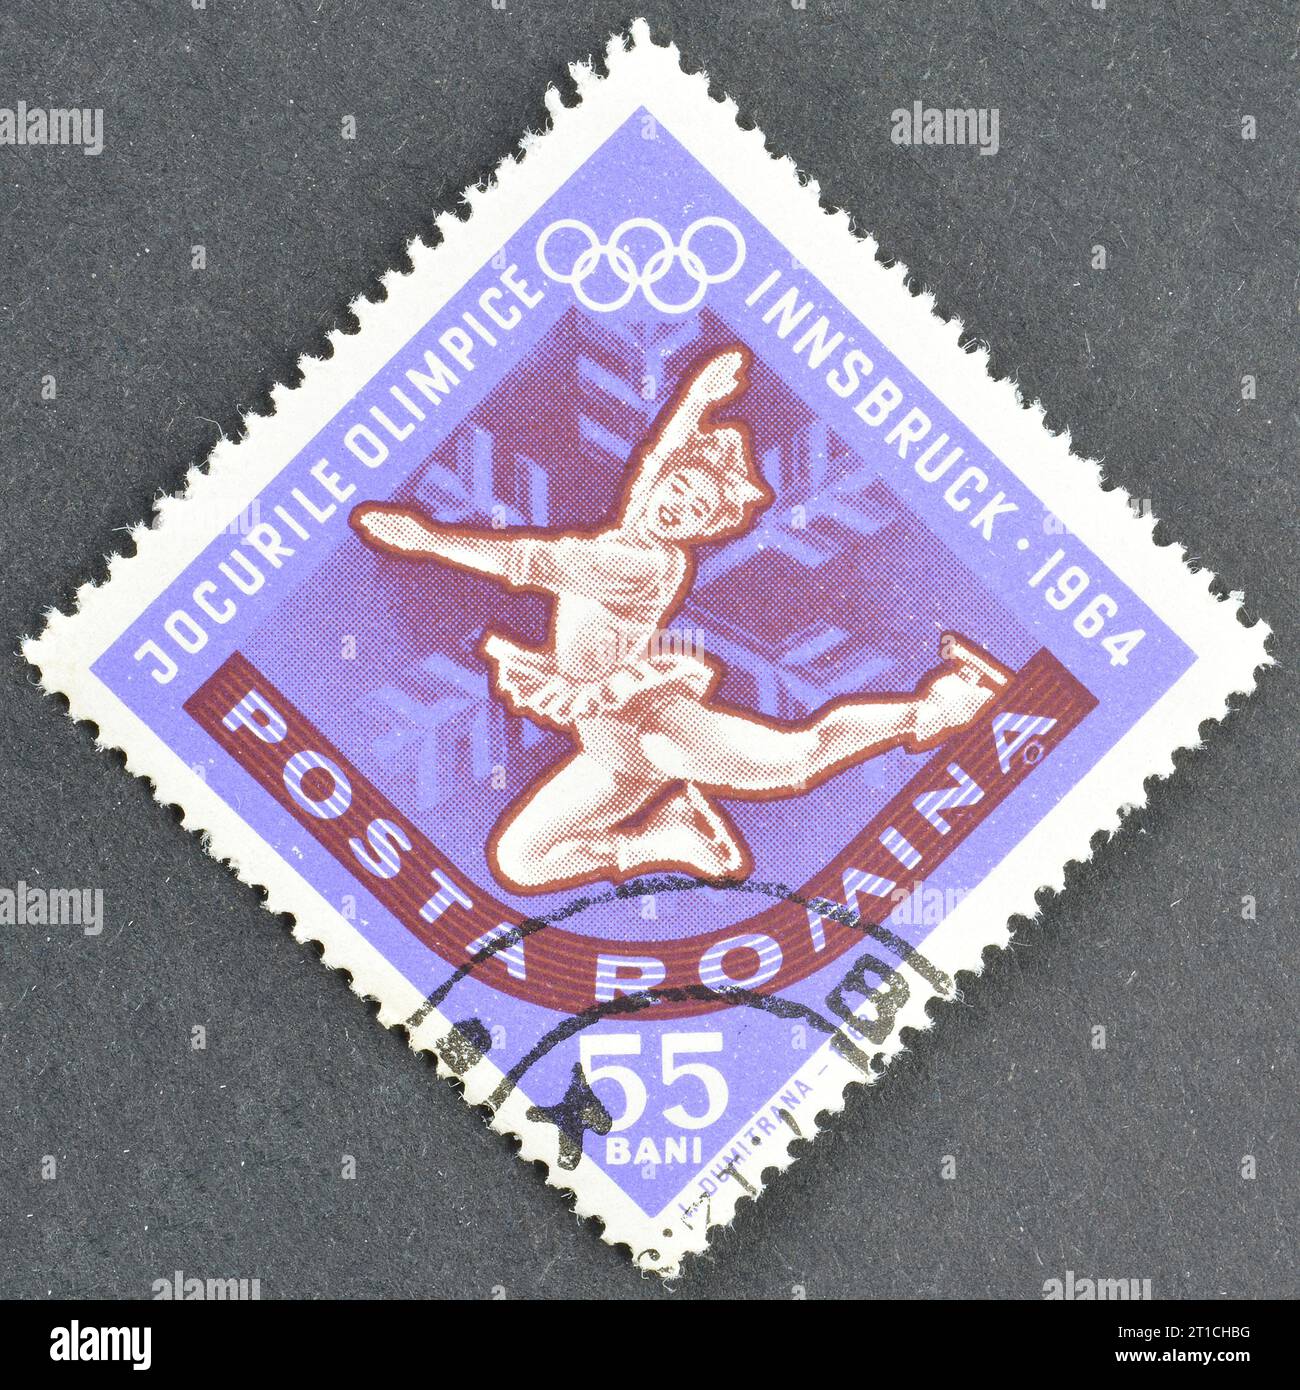 https://c8.alamy.com/comp/2T1CHBG/cancelled-postage-stamp-printed-by-romania-that-shows-ice-figure-skating-and-promotes-winter-olympics-in-innsbruck-circa-1963-2T1CHBG.jpg